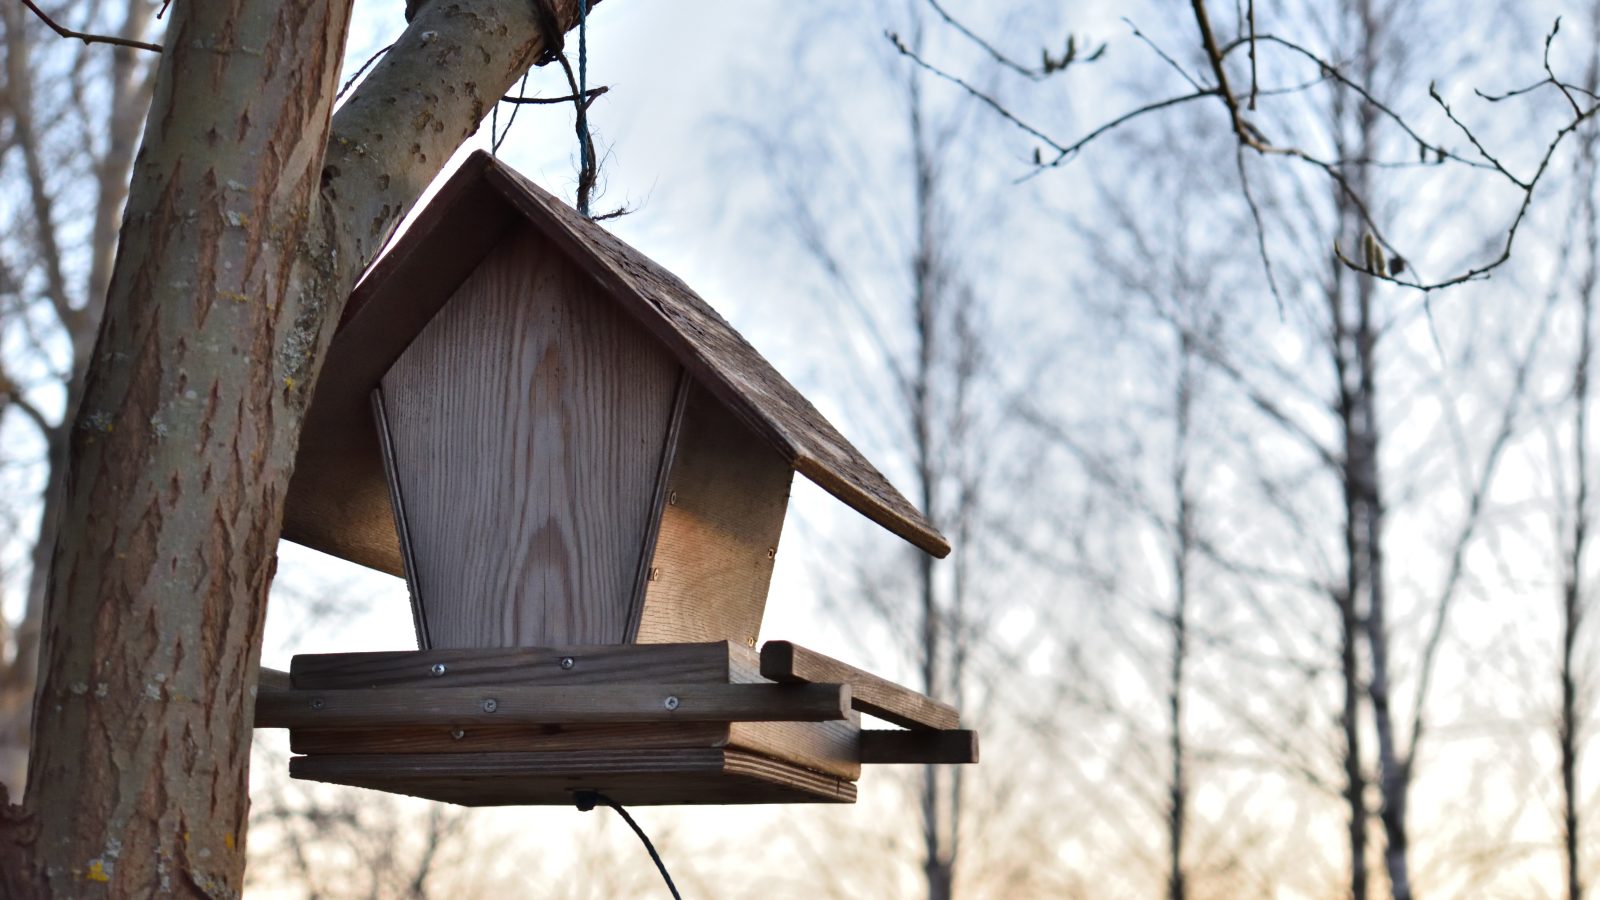 brown wooden bird house on tree branch during daytime